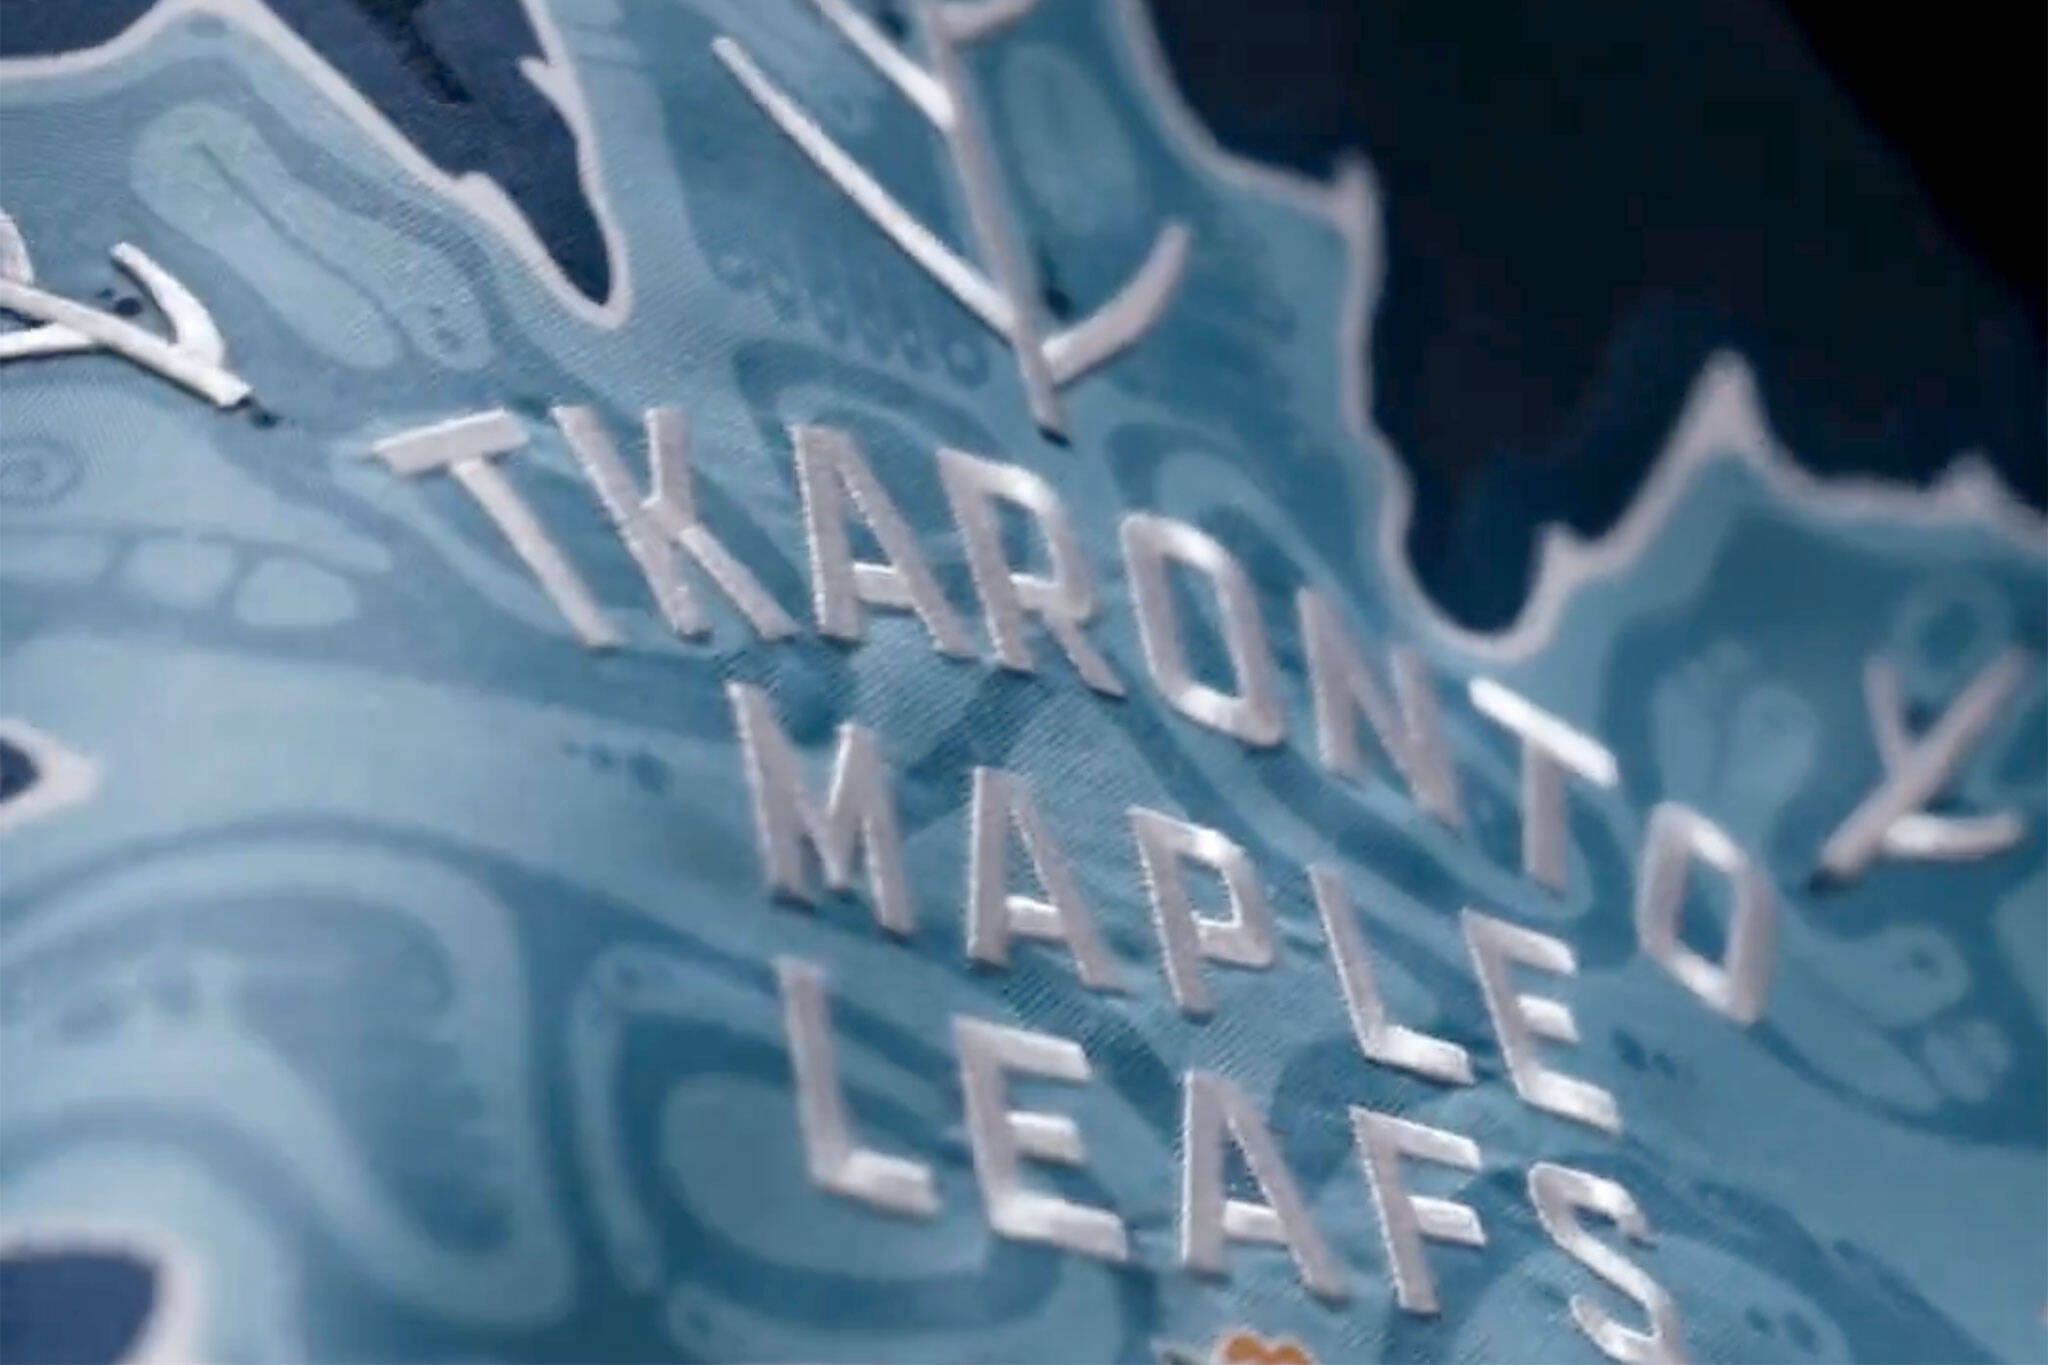 Artist creates incredible Leafs concept jersey that might be perfect for  their outdoor game - Article - Bardown